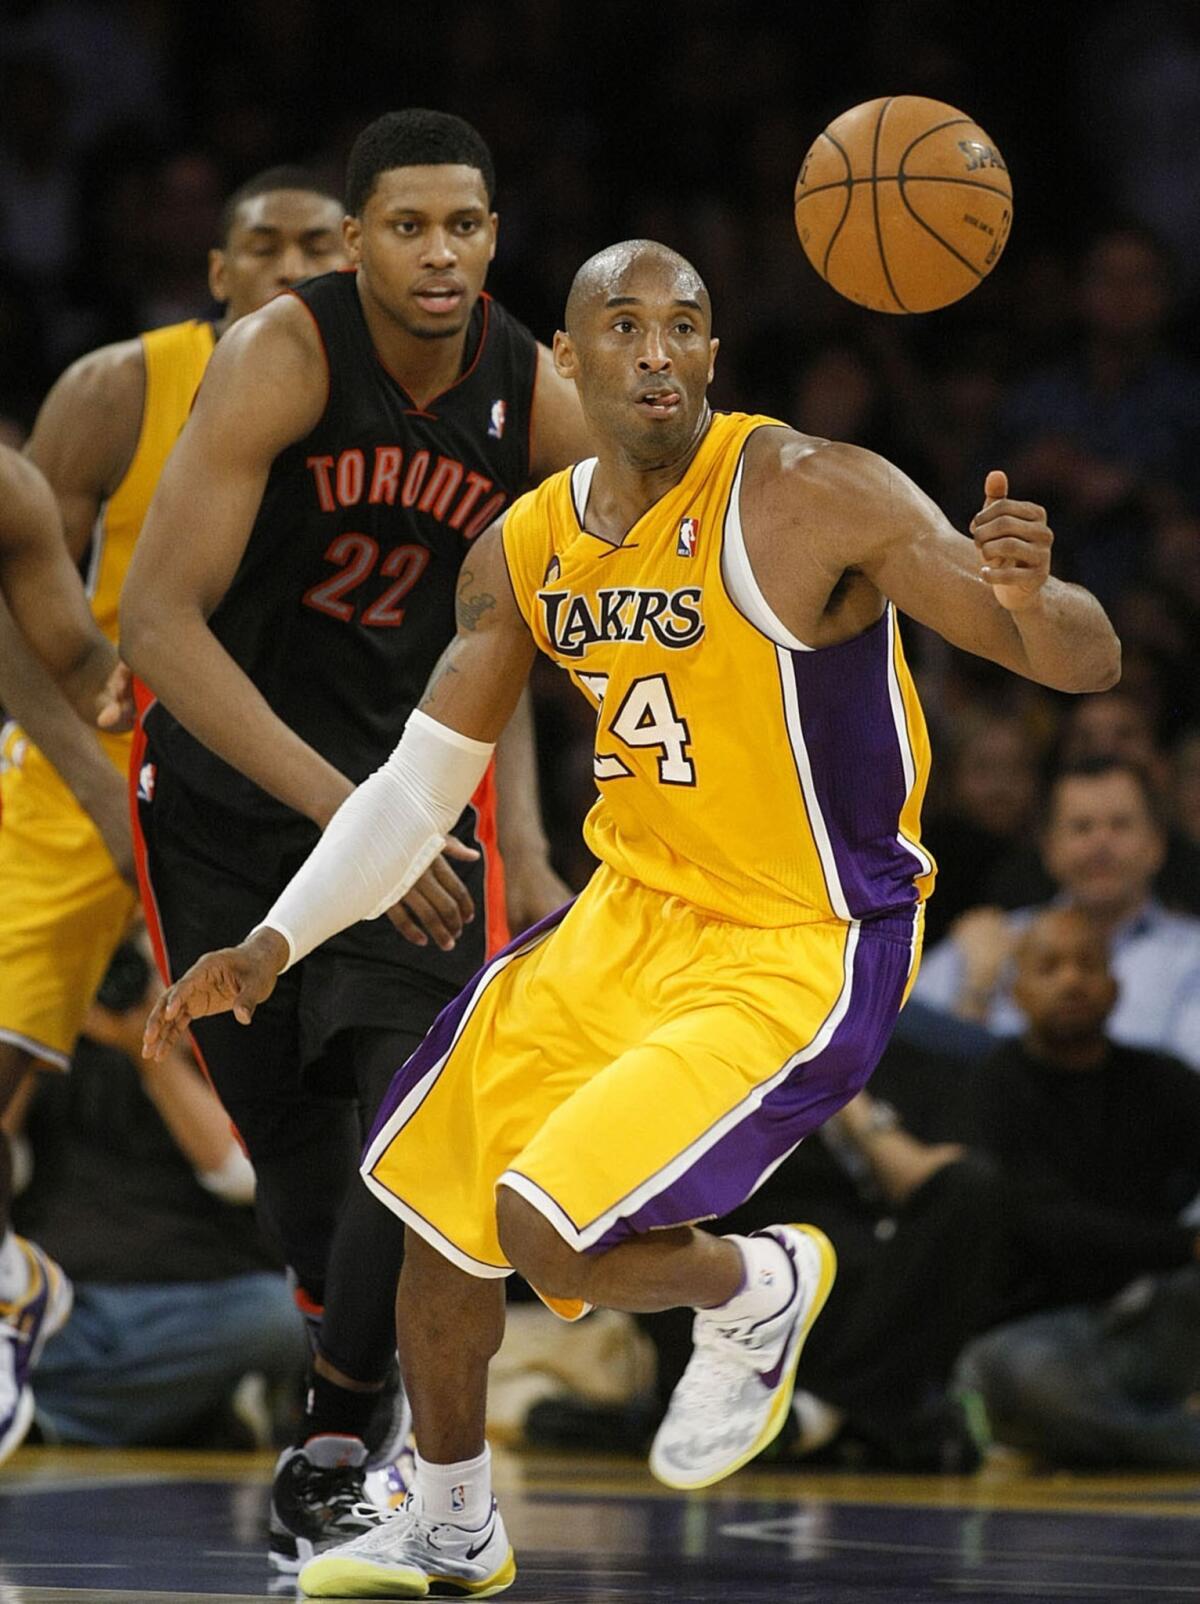 Don't expect to see much of Kobe Bryant on the court with the Lakers in the preseason.